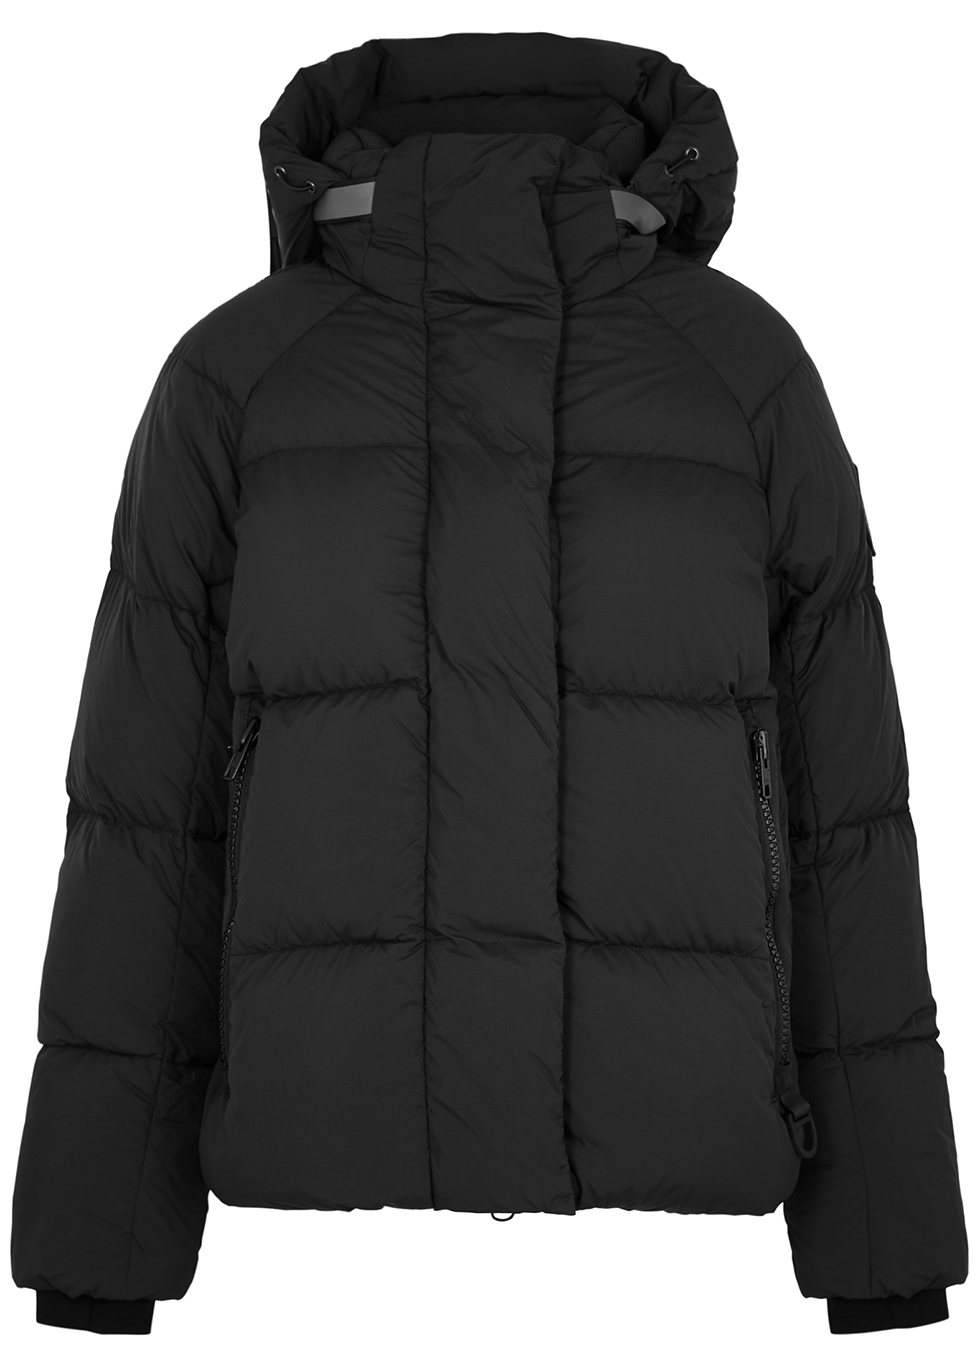 Junction black quilted EnduraLuxe shell jacket